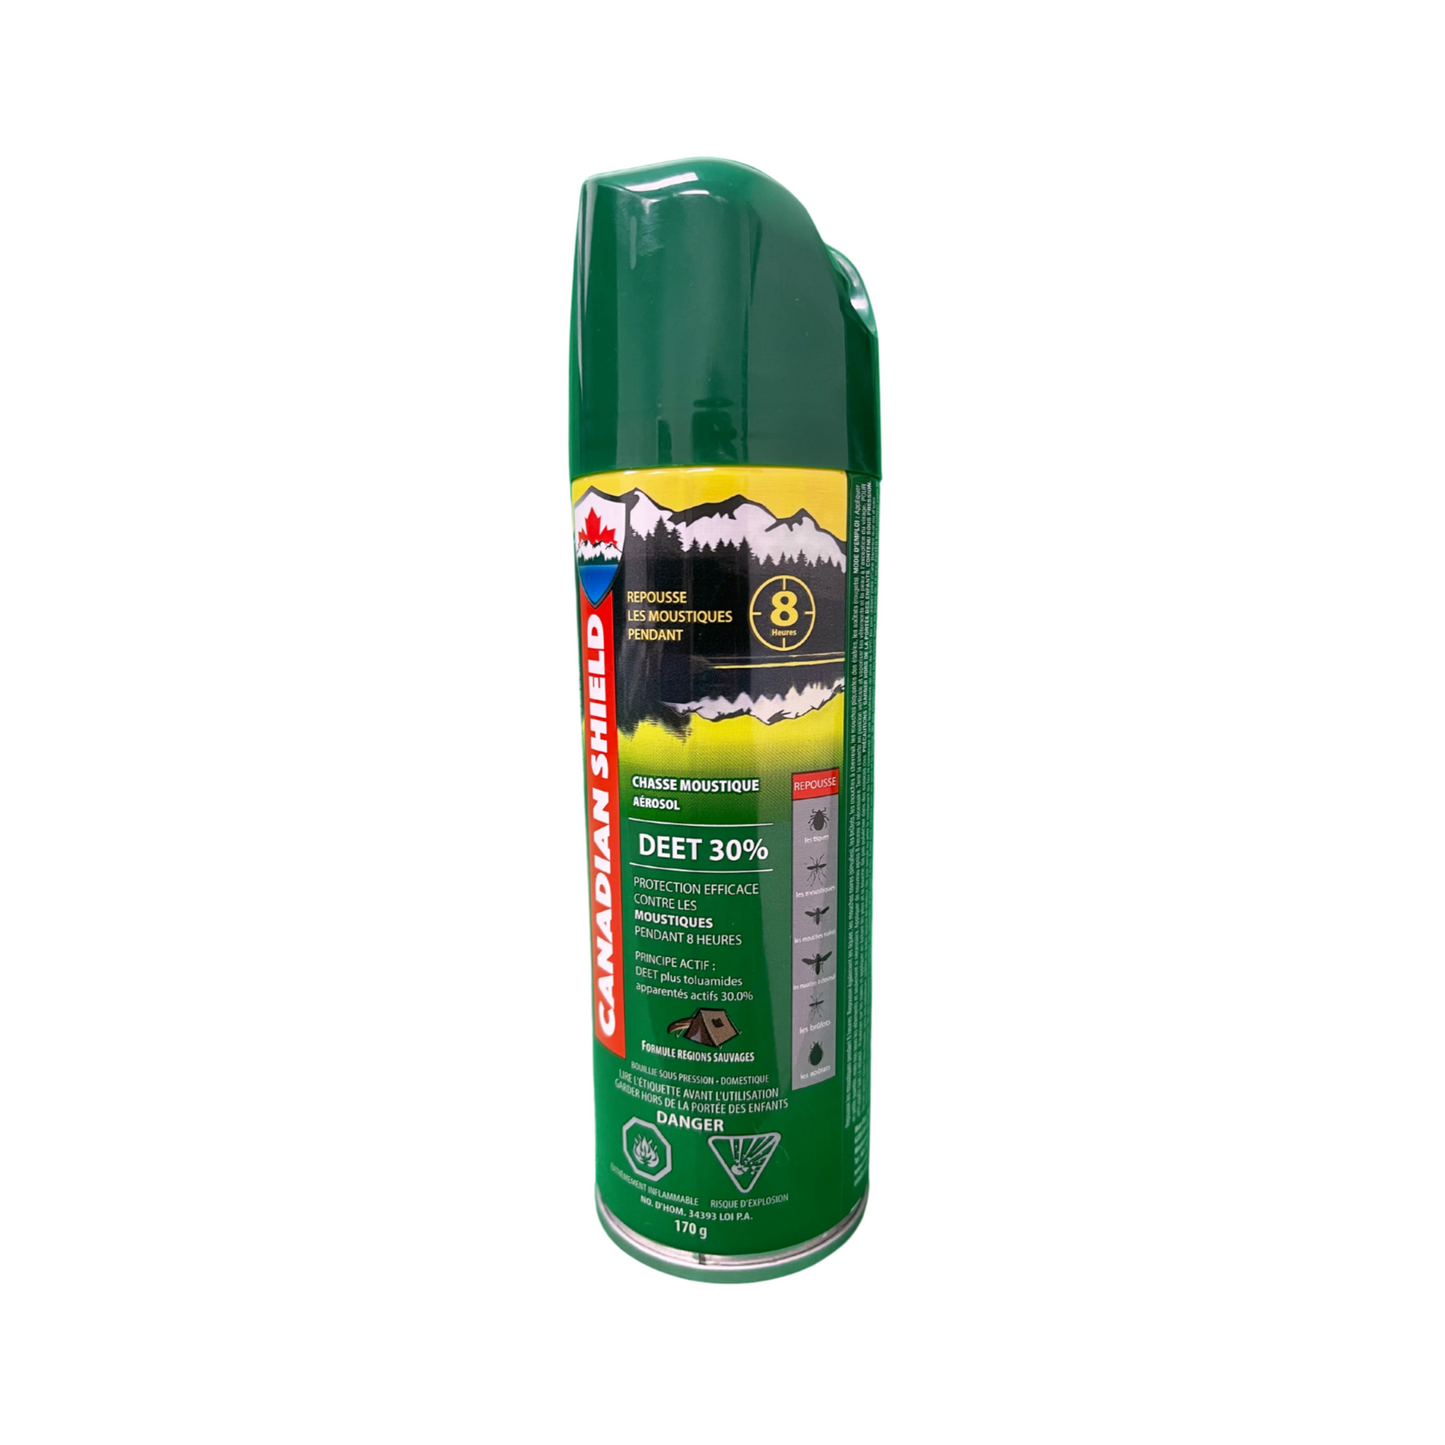 Canadian Shield Mosquito & Insect Repellent Aerosol | For Hunting, Fishing, Camping, Family Fun, and More | 8 Hour of Protection | 30% Deet | (170G)